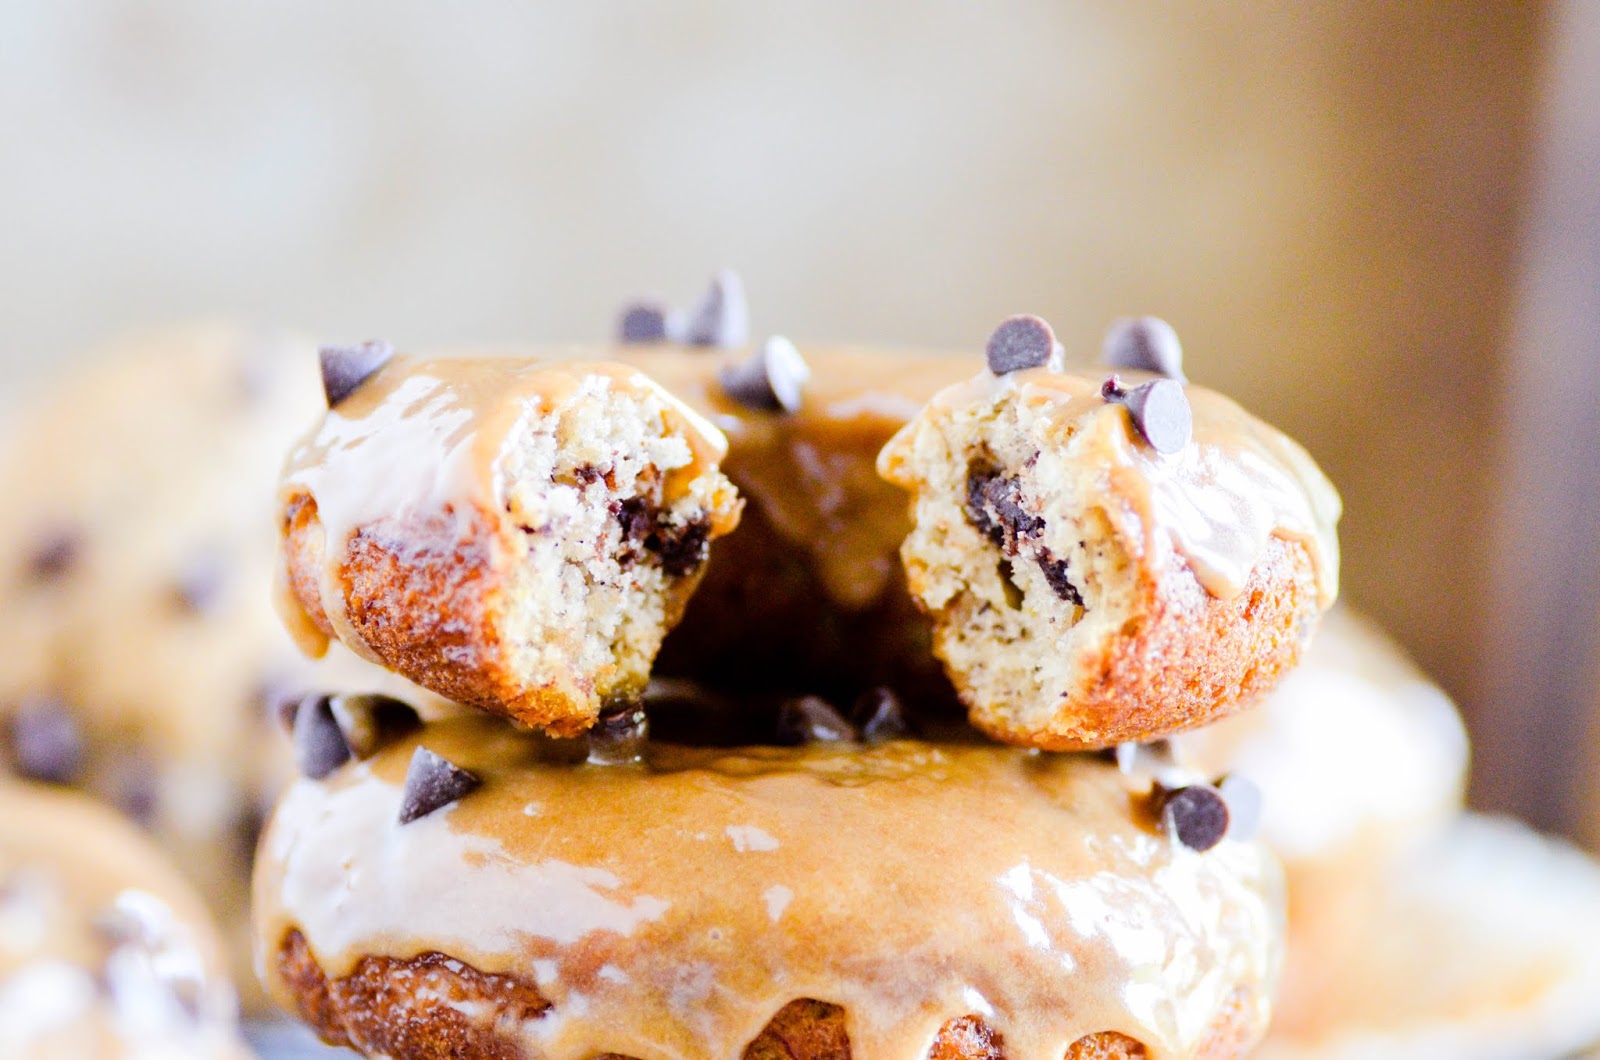 Our family favorite recipe for banana bread baked into donuts and topped with a Biscoff glaze!